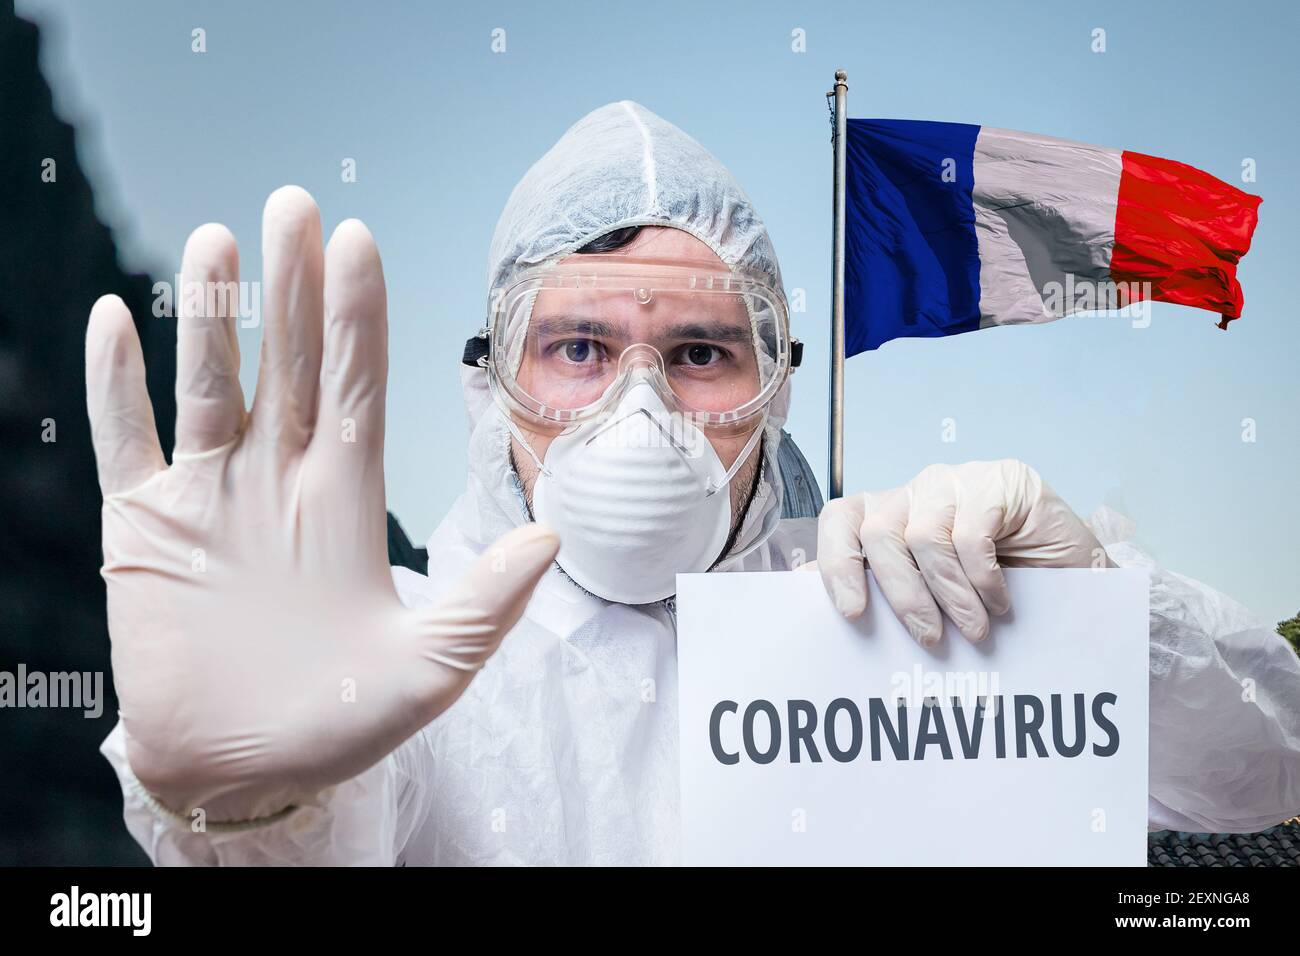 Doctor in coveralls warns of coronavirus infection in France. French flag in background. Stock Photo